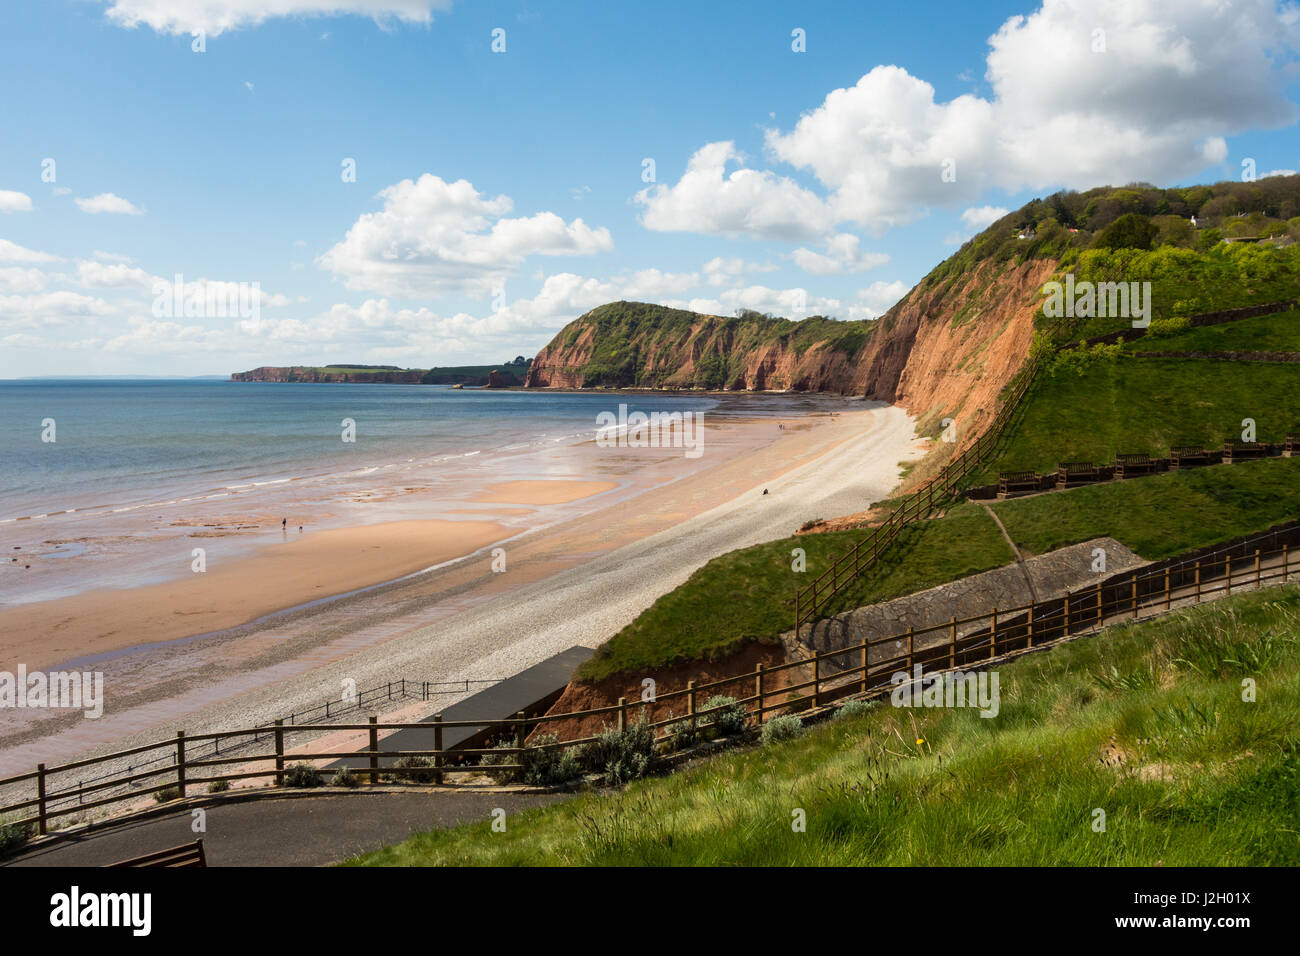 Views of Sidmouth beaches and town, including the cliffs and rocks, architecture, buildings, Jacobs Ladder, pebble beaches and sea. Stock Photo